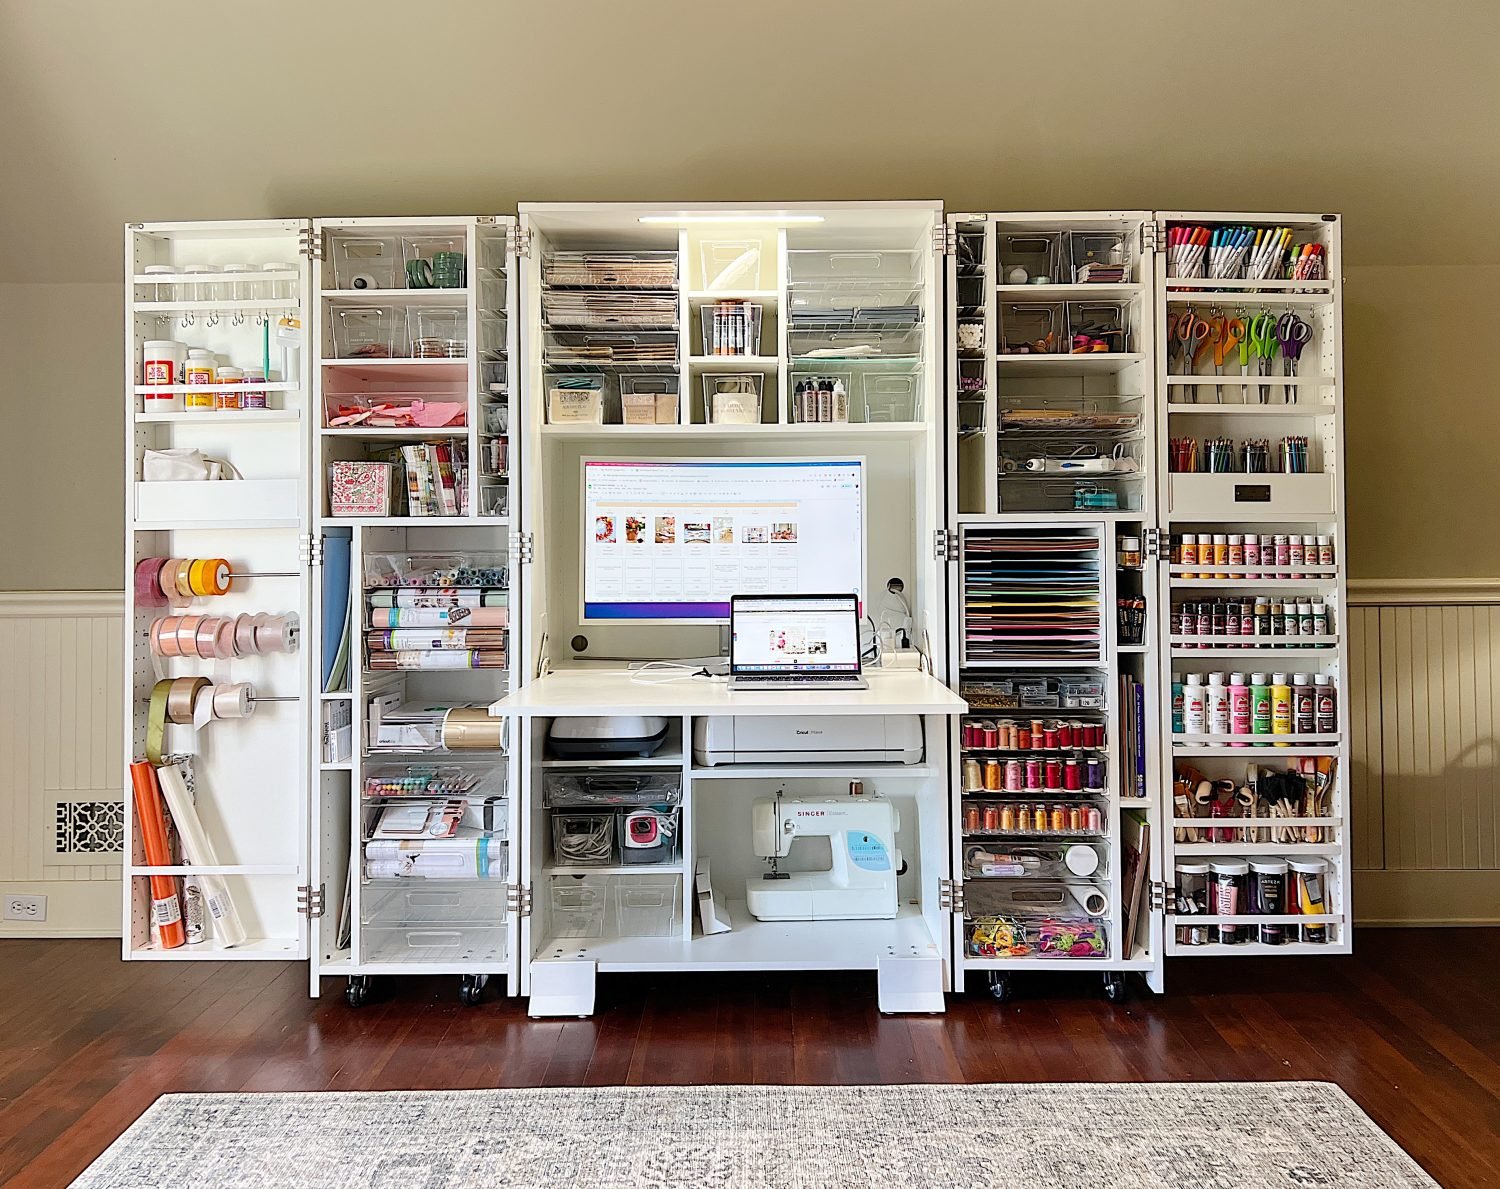 The Dream Box 2 which is the perfect storage solution for all of your craft supplies.